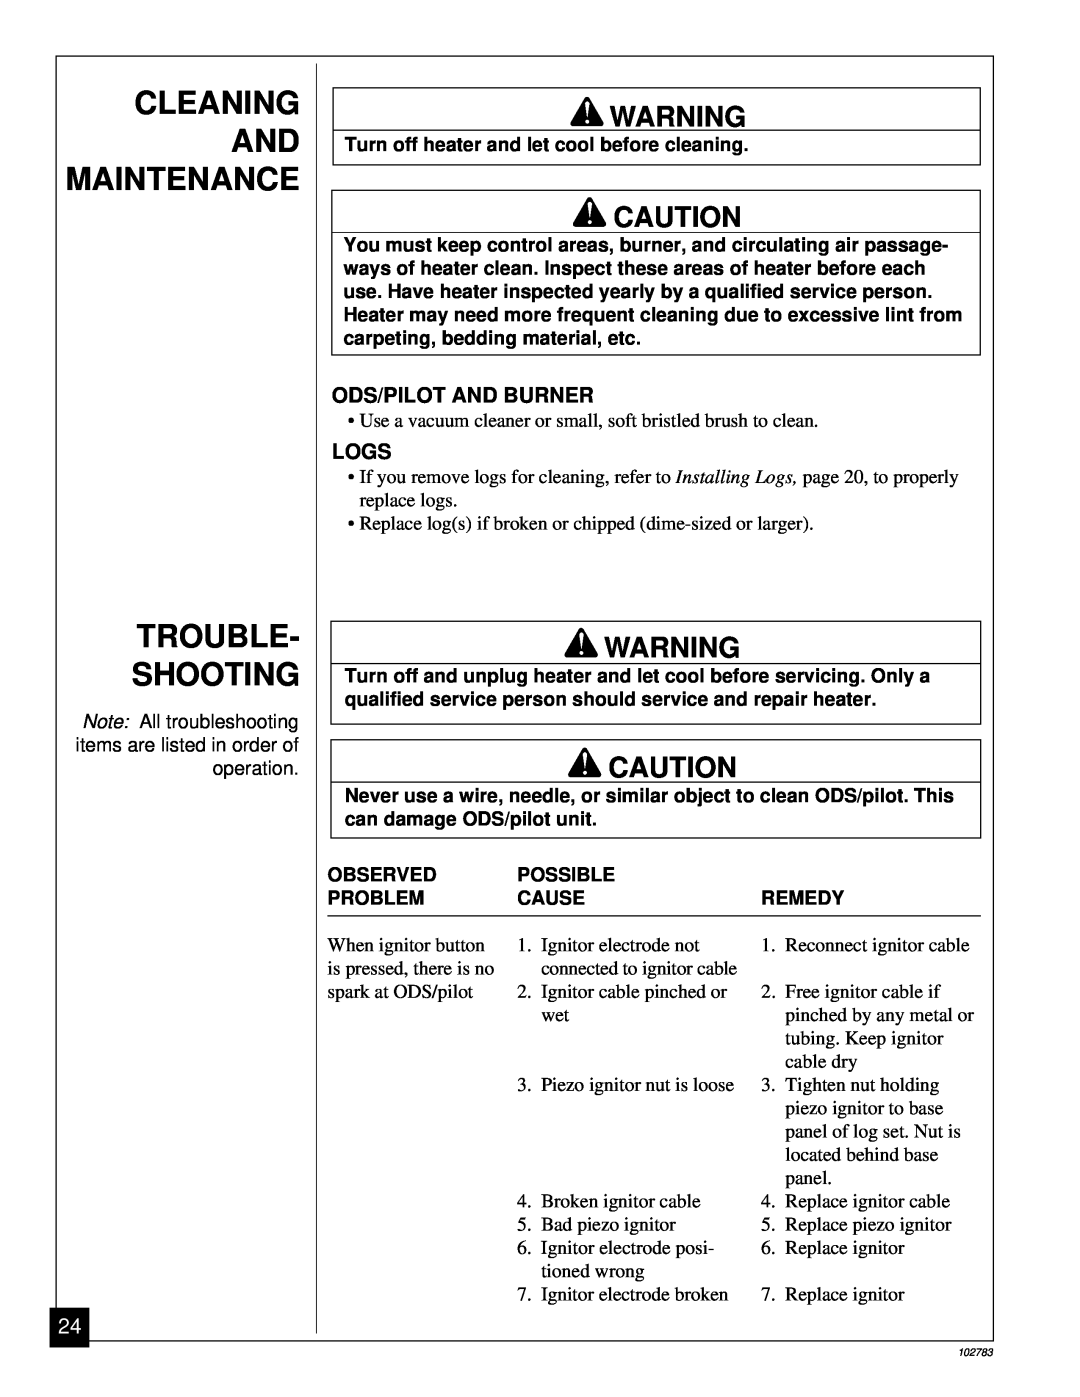 Desa 102783-01B installation manual Cleaning And Maintenance Trouble Shooting, Ods/Pilot And Burner, Logs 